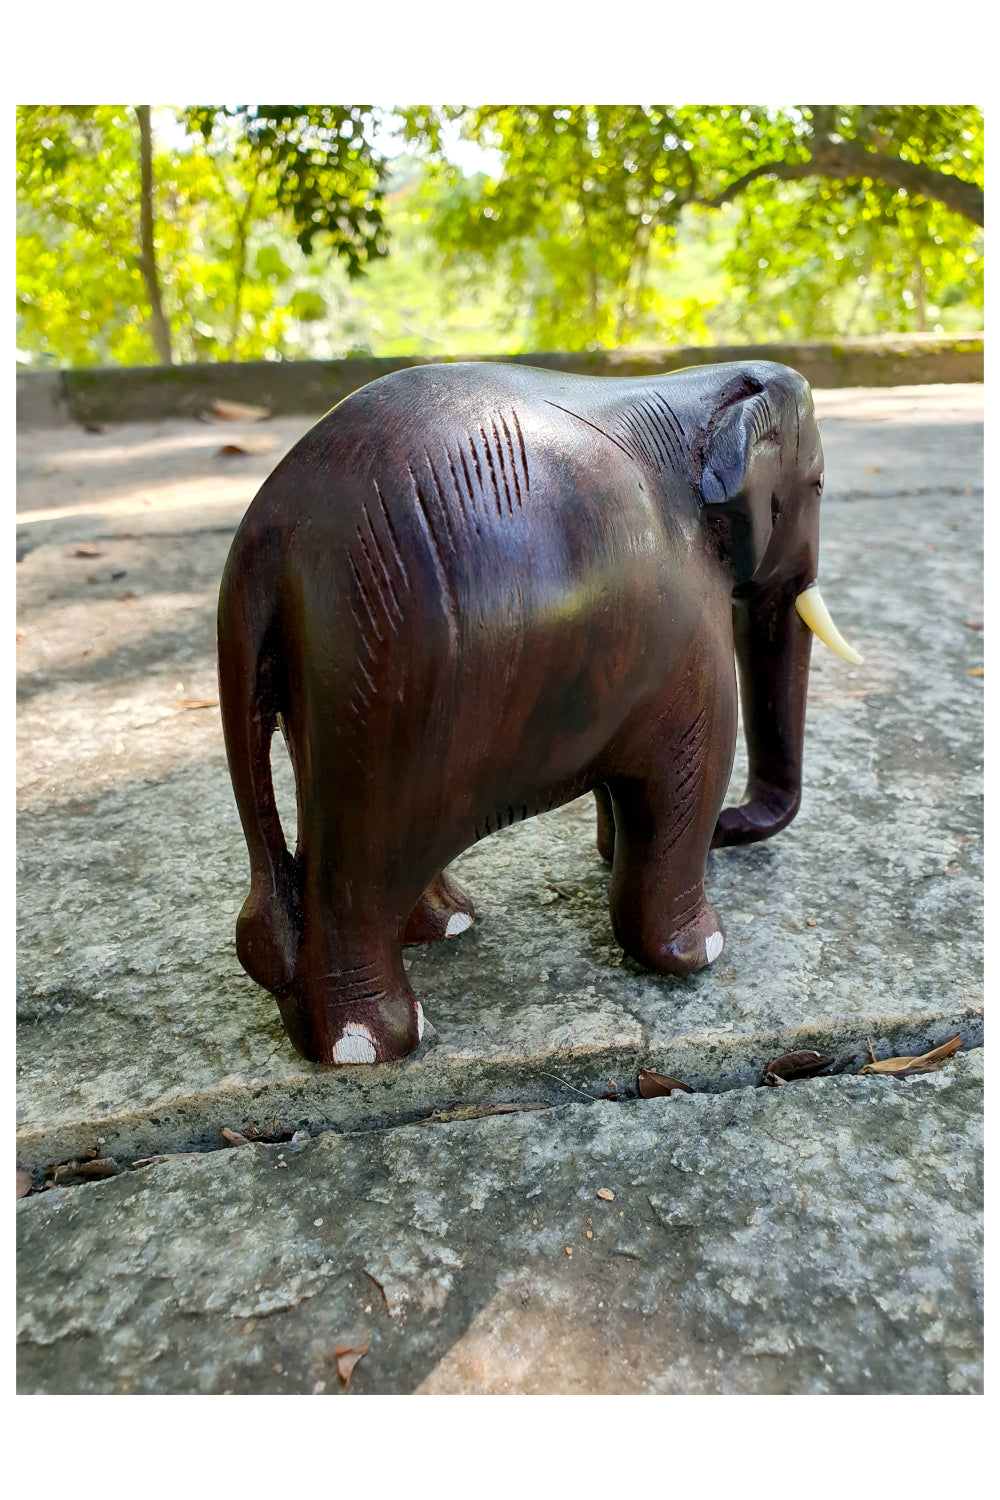 Southloom Handmade Elephant Handicraft (Carved from Rose Wood) 4 Inches